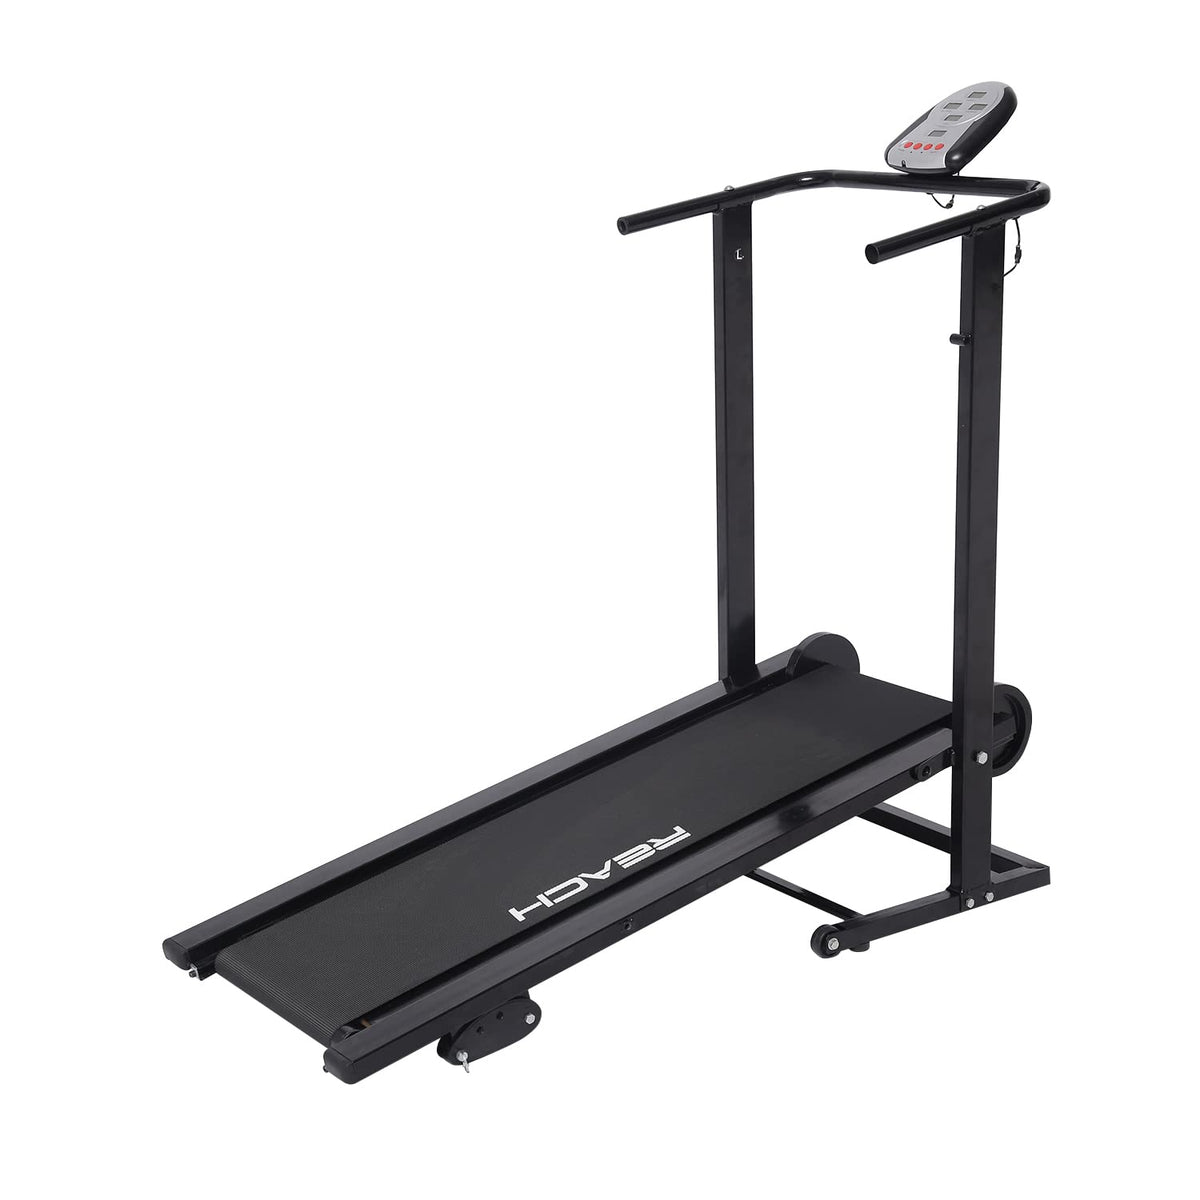 ELEV8 by Reach Manual Treadmill | Foldable Treadmill with Wheels | Walking & Running Machine for Home Gym | with Manual Incline | Max User Weight 100 Kgs | 12 Month Warranty